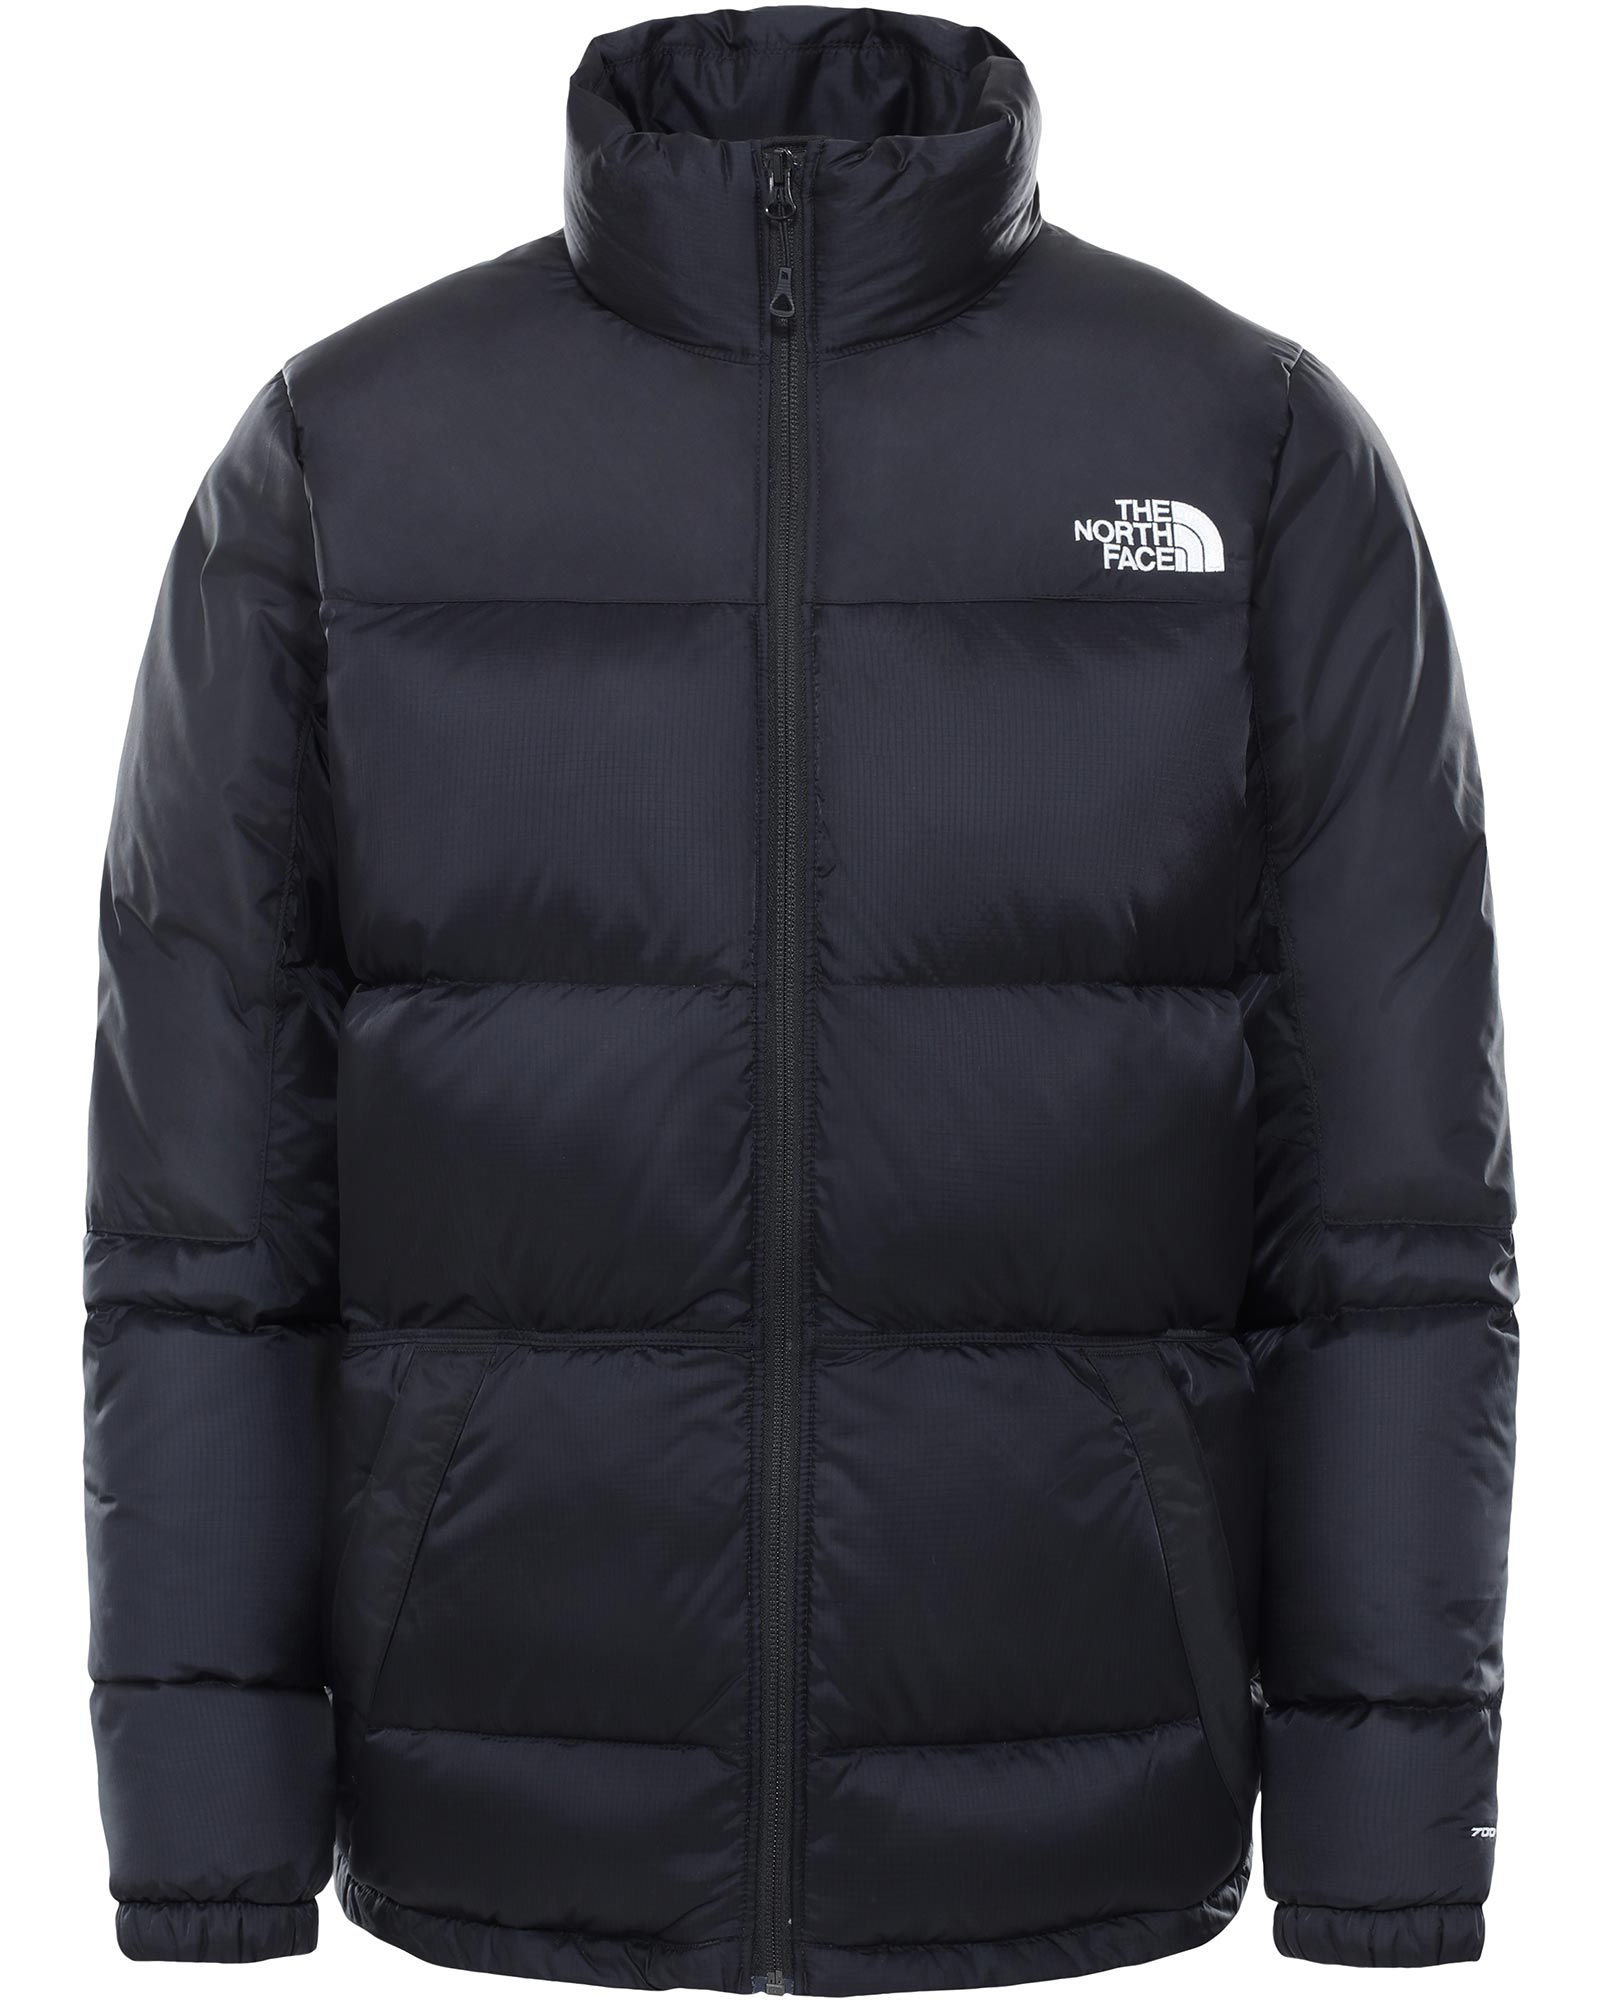 The North Face Diablo Womens Down Jacket